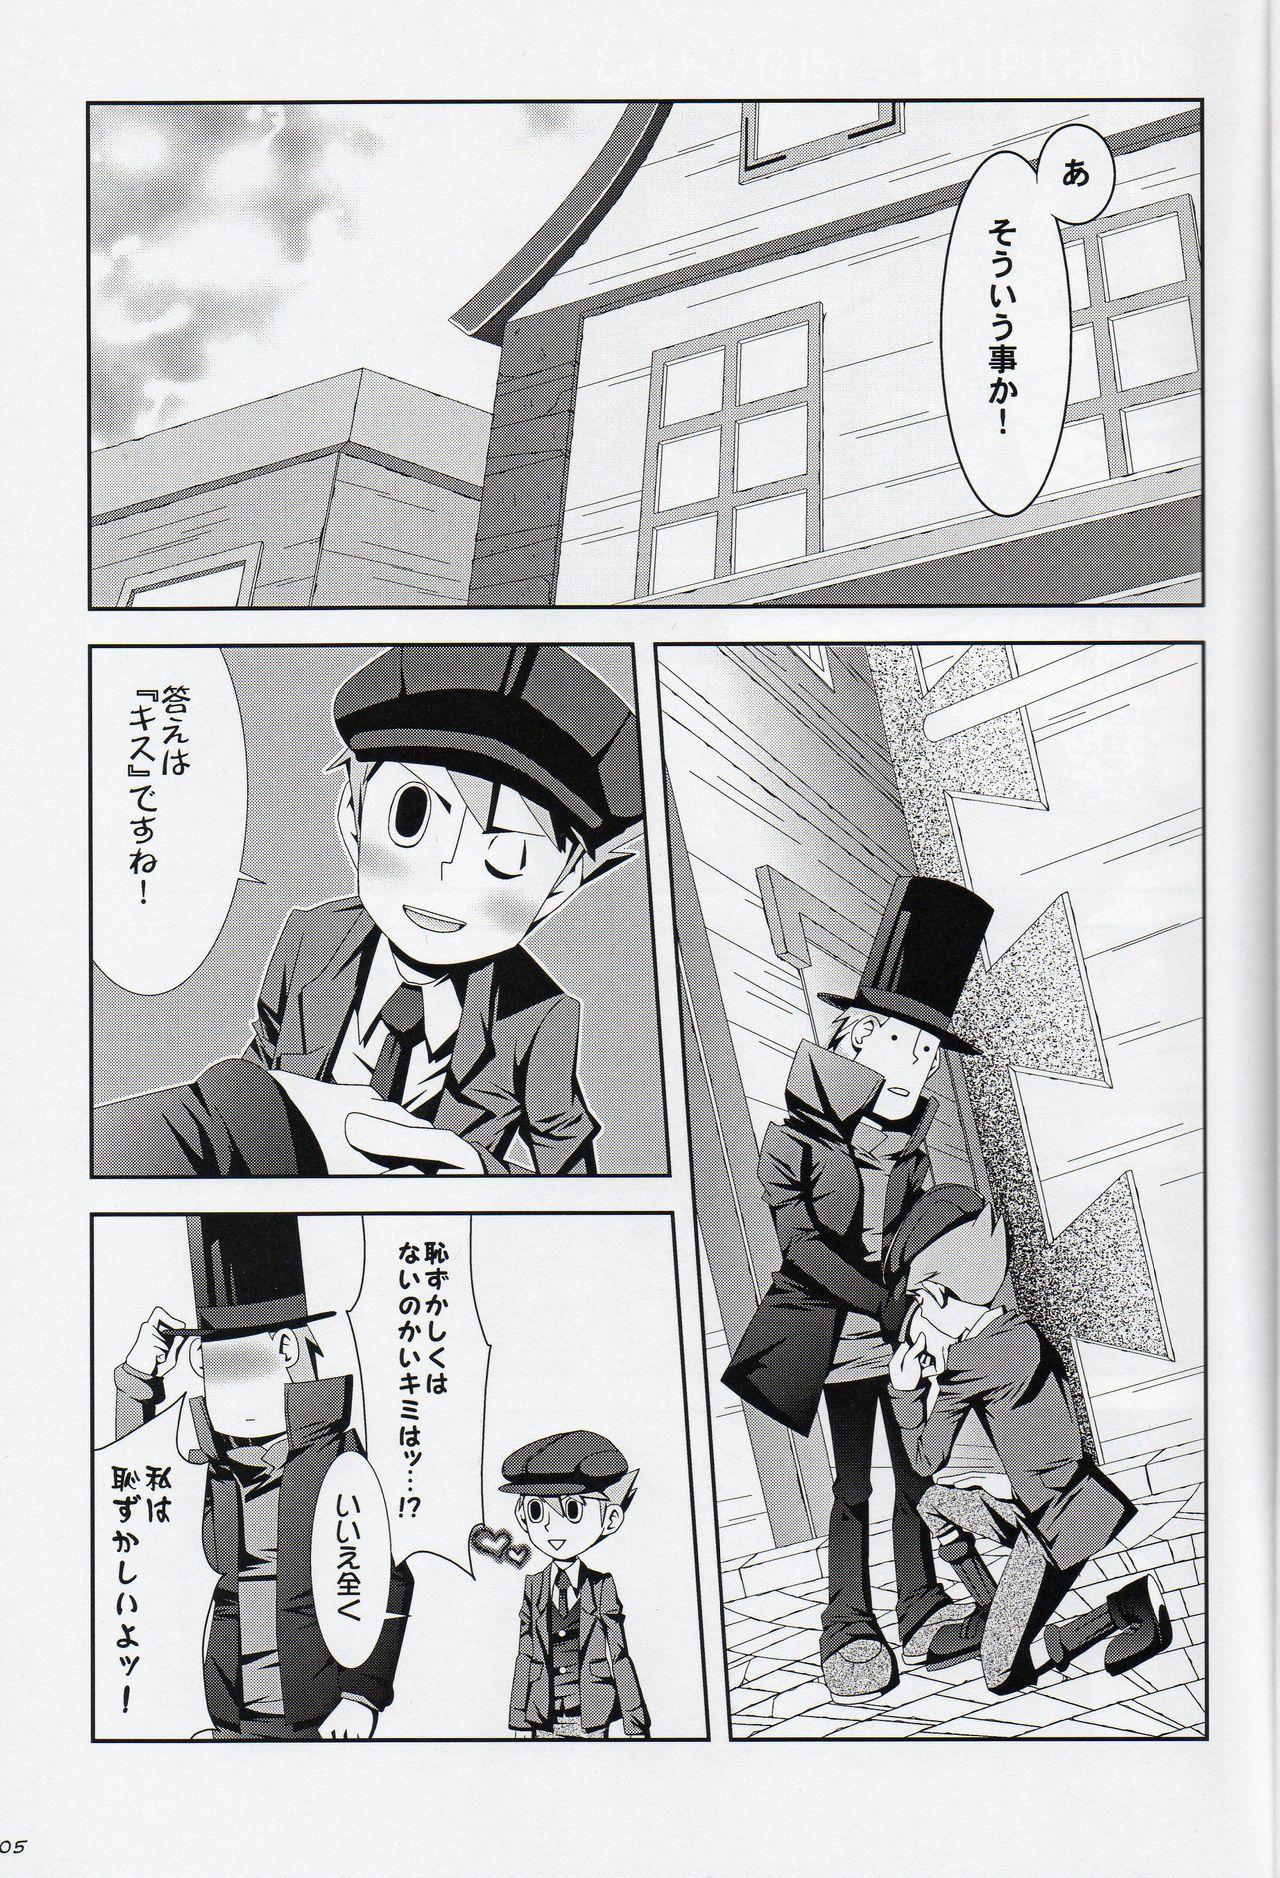 Chubby Puzzle - Professor layton Licking - Page 5